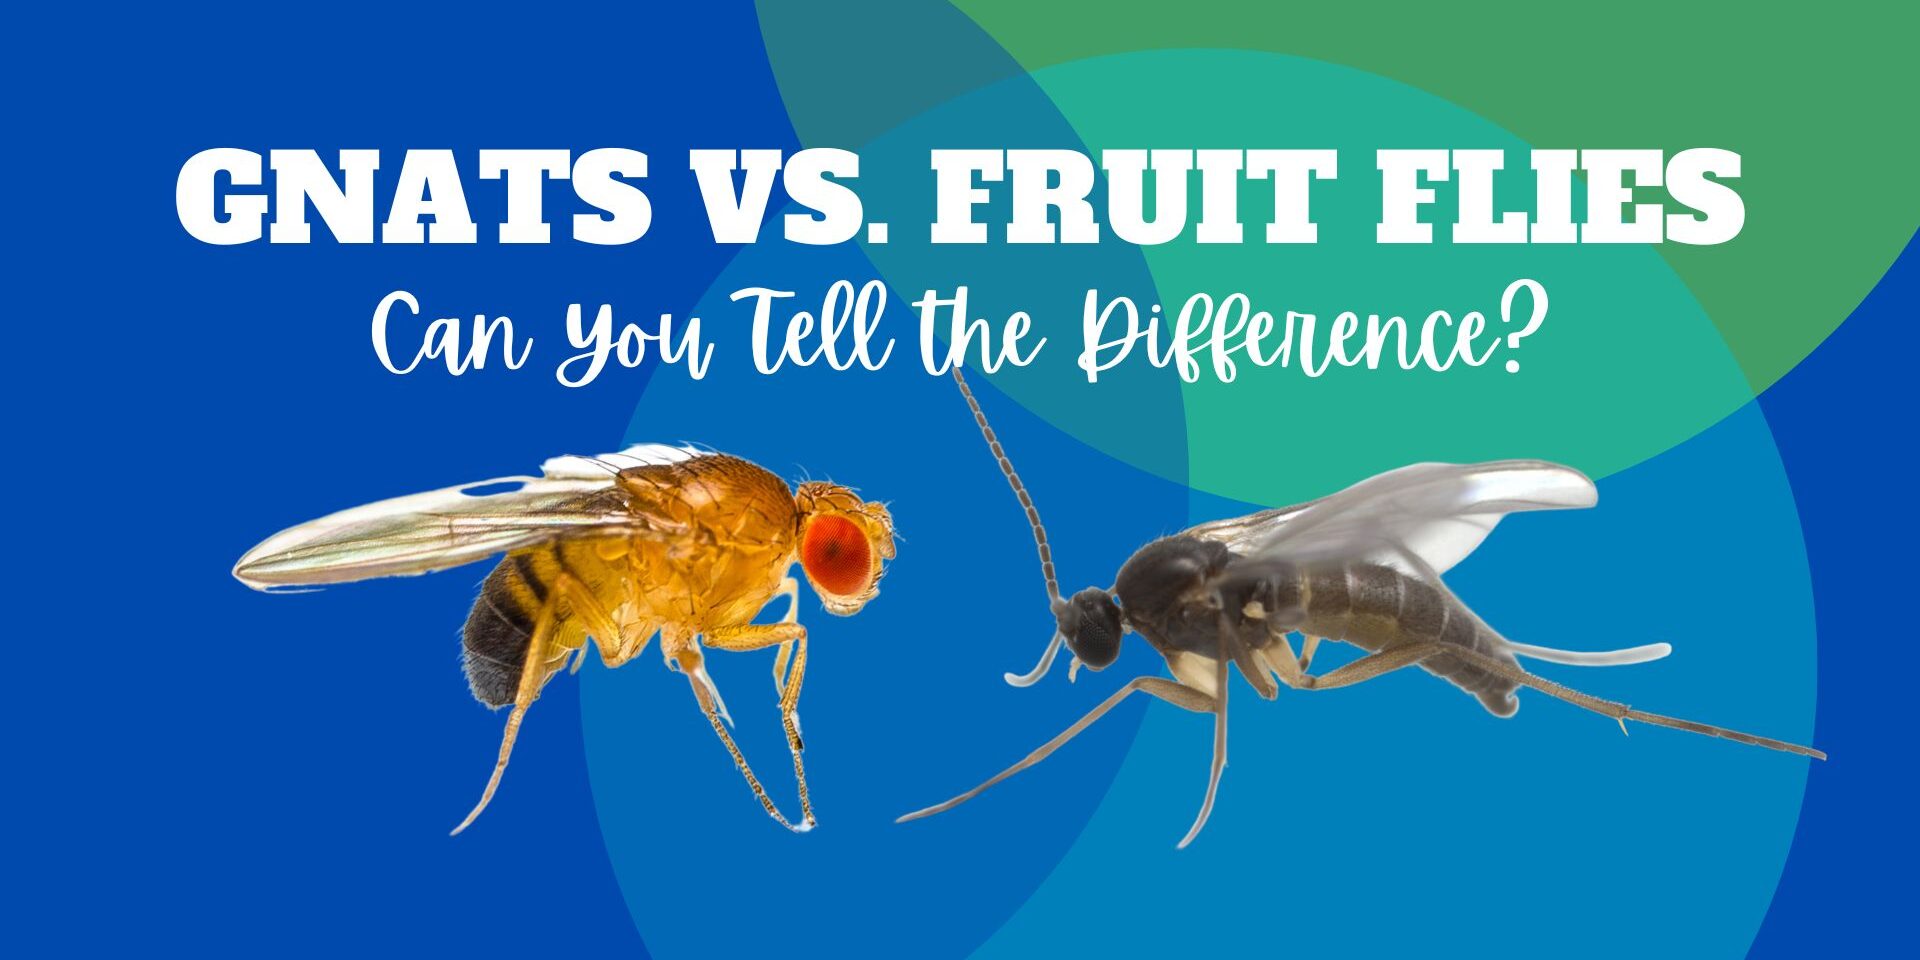 Gnats vs. fruit flies — Can You Tell the Difference